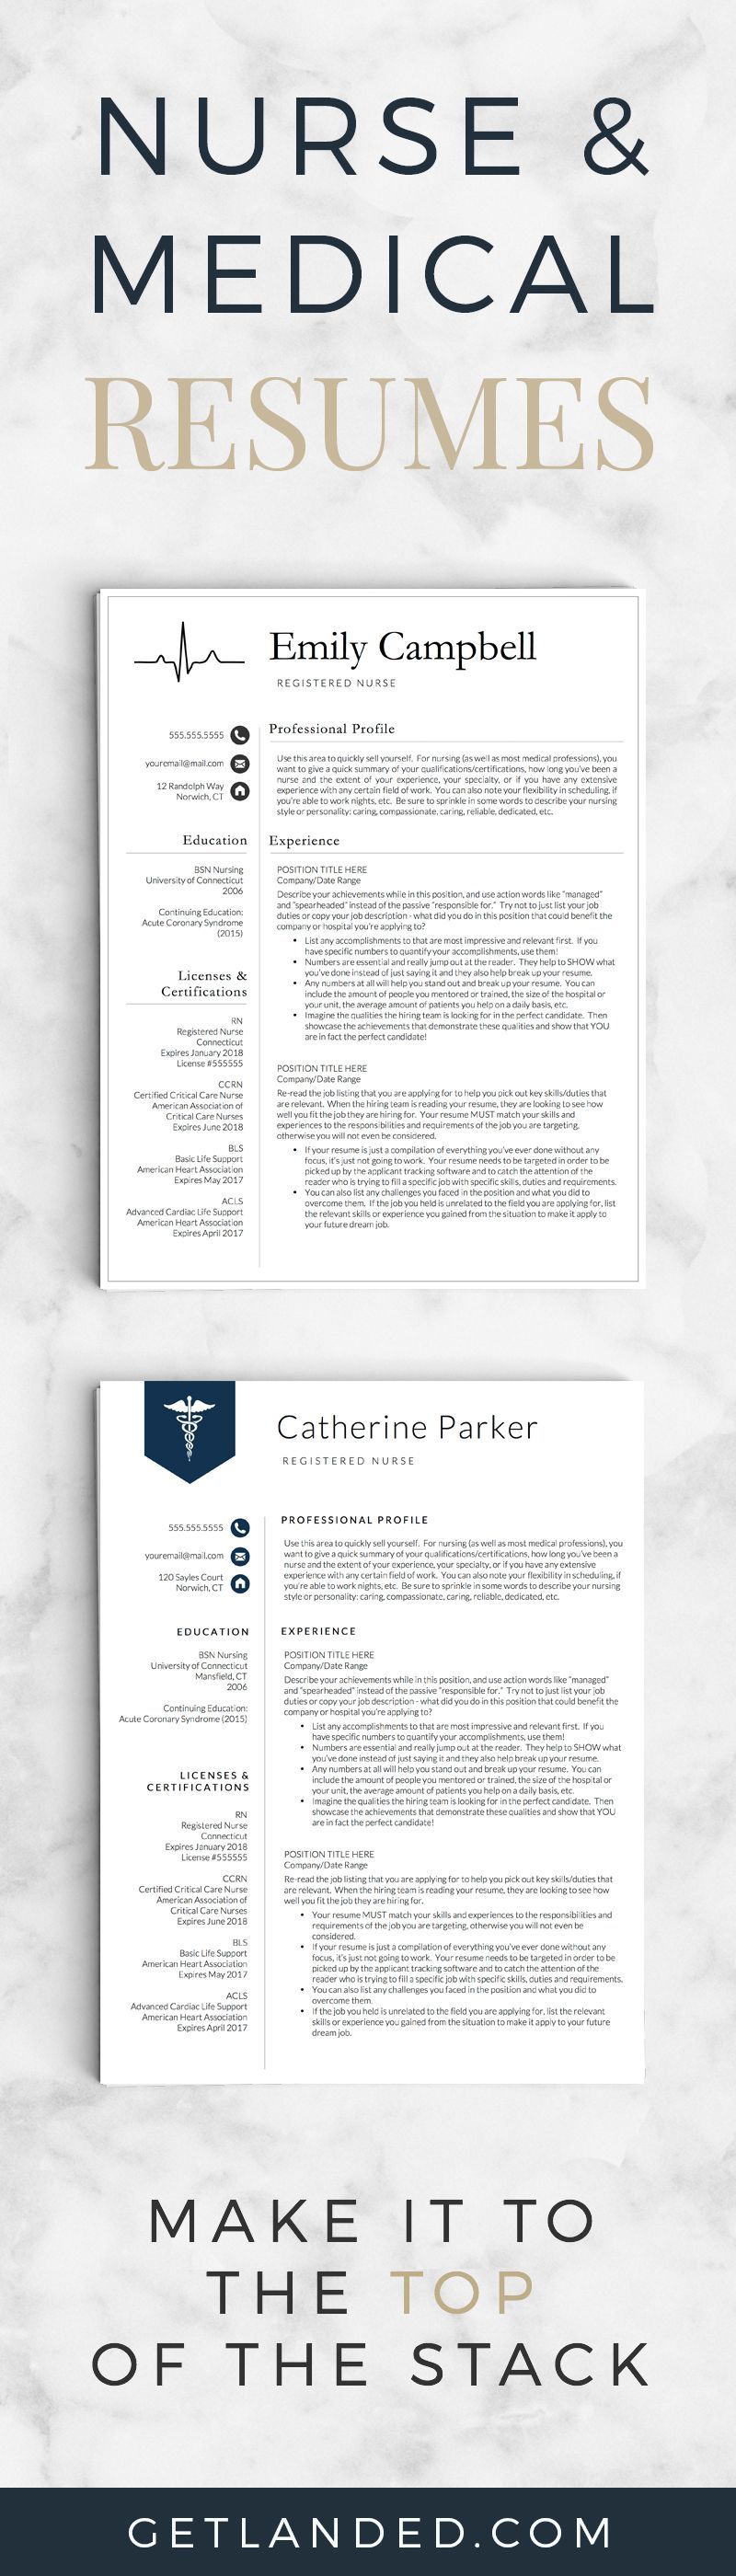 Nurse resume templates | Medical resumes | Resume templates specifically designed for the nursing profession!